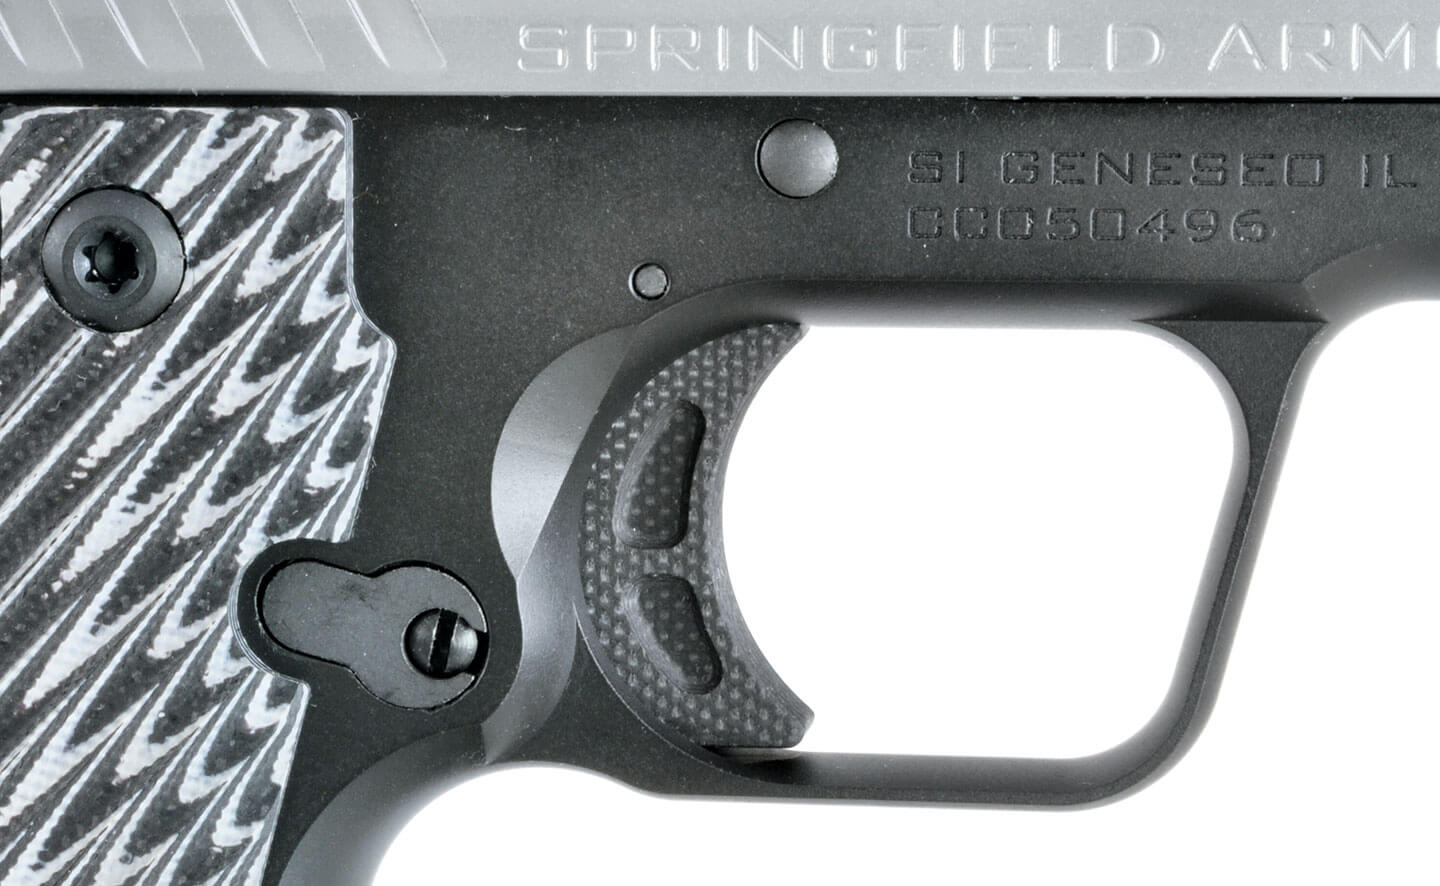 Detail photo of the G10 trigger shoe from Hogue